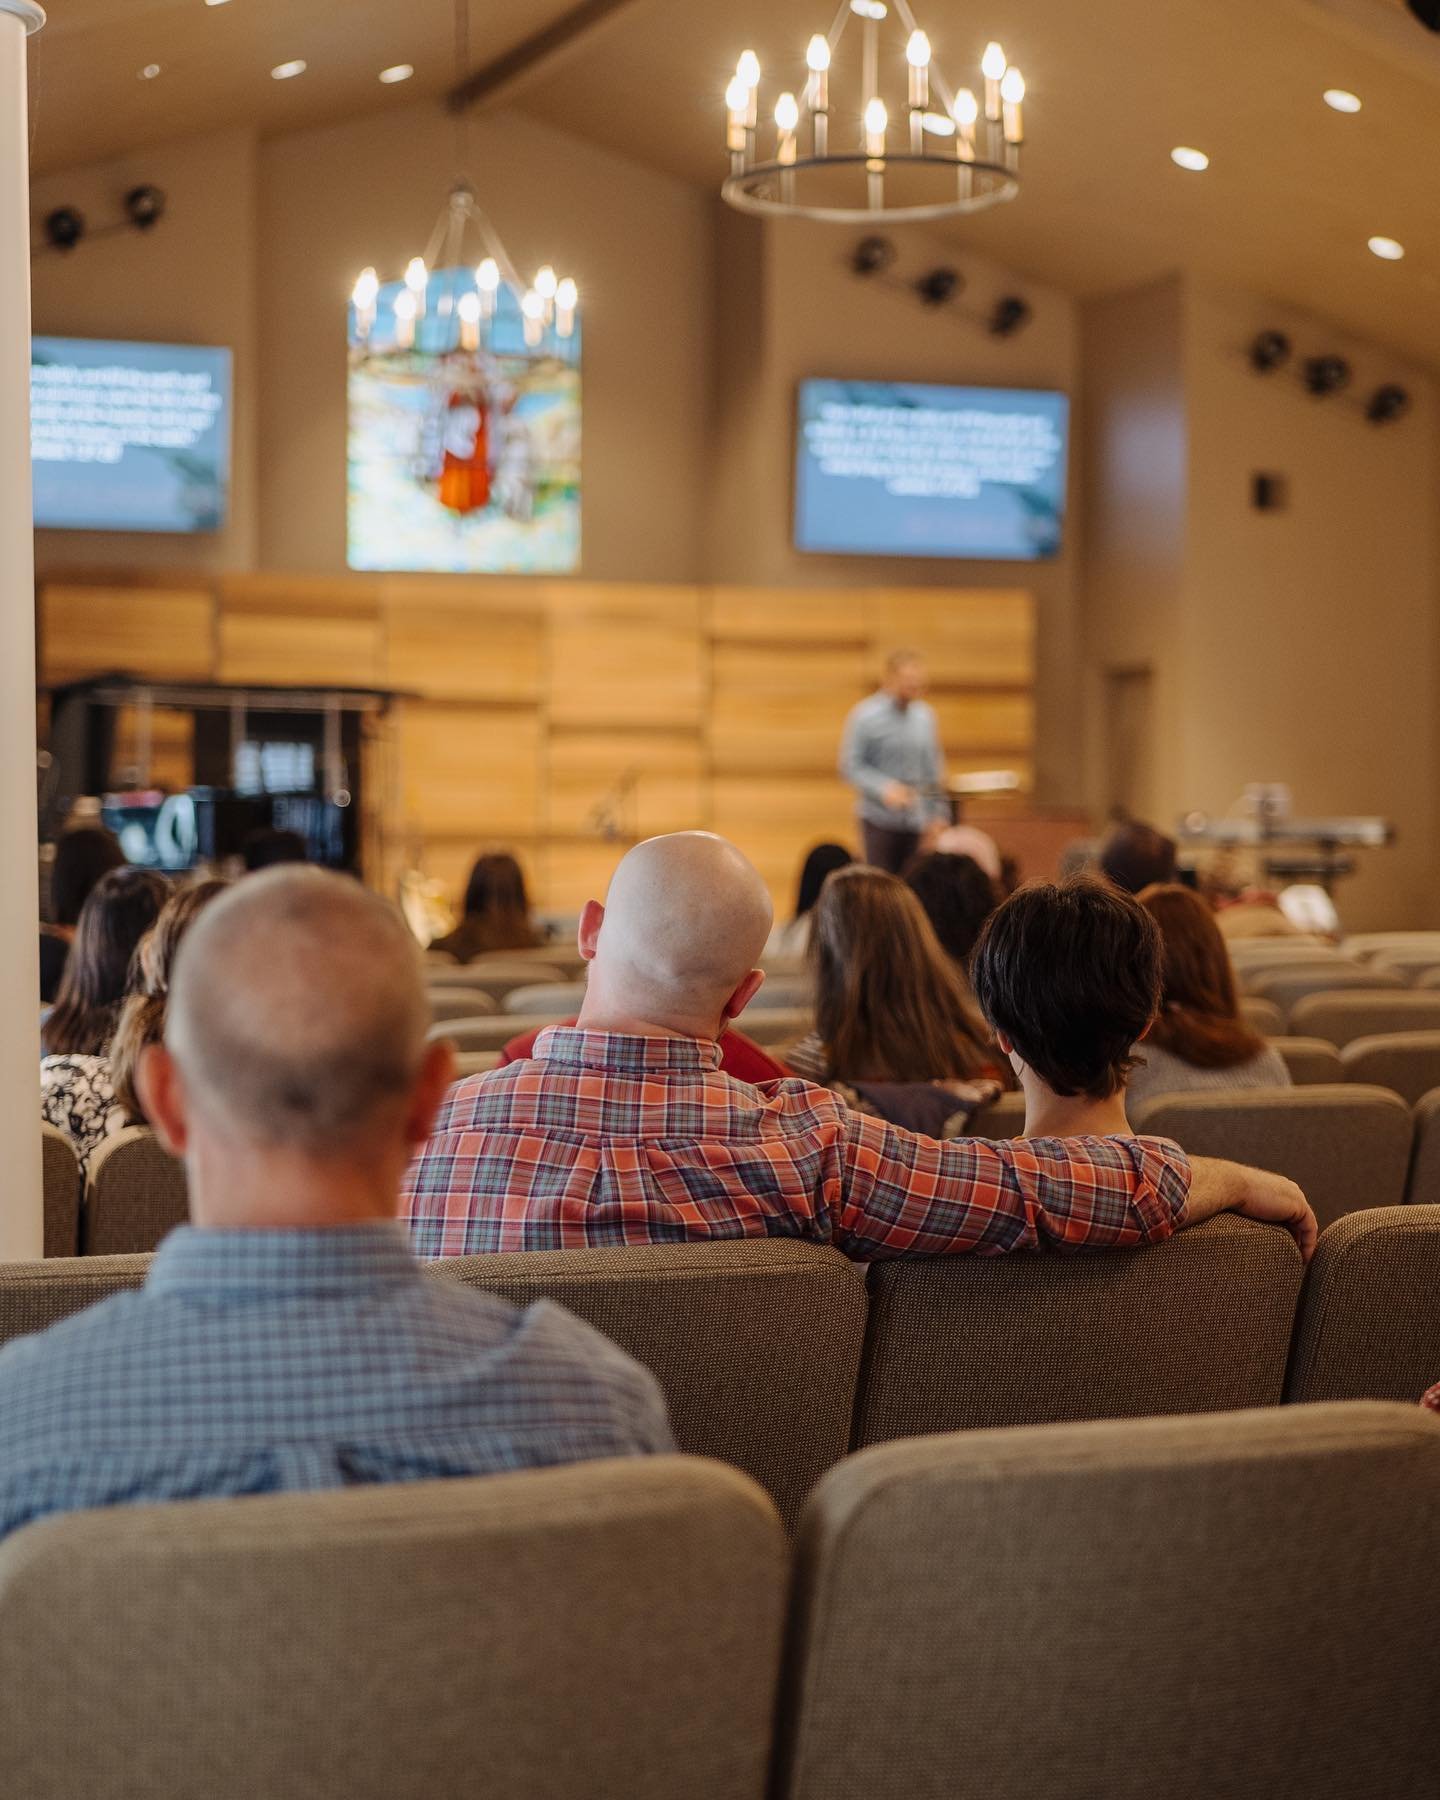 Join us for worship tomorrow! Our service begins at 10:30 a.m. We&rsquo;d love to see you there!